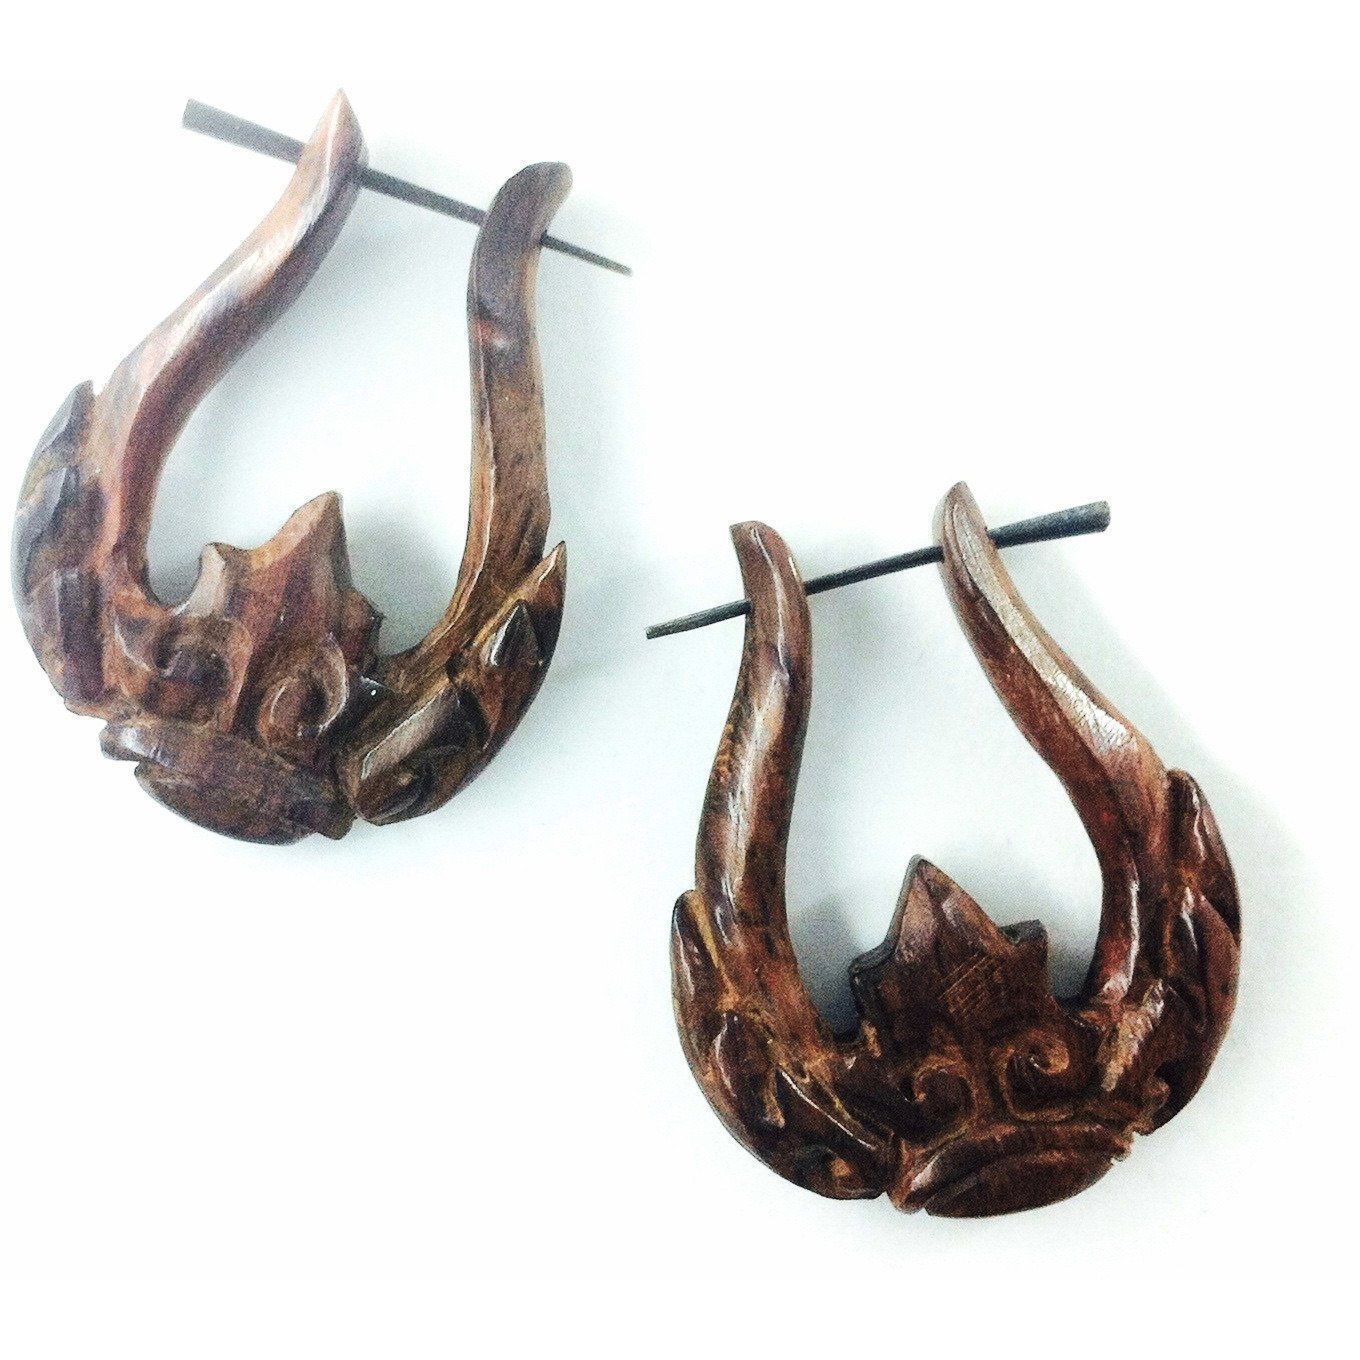 Natural Jewelry :|: Scepter. Wood Earrings. Natural Rosewood, Handmade Wooden Jewelry. | Wood Earrings